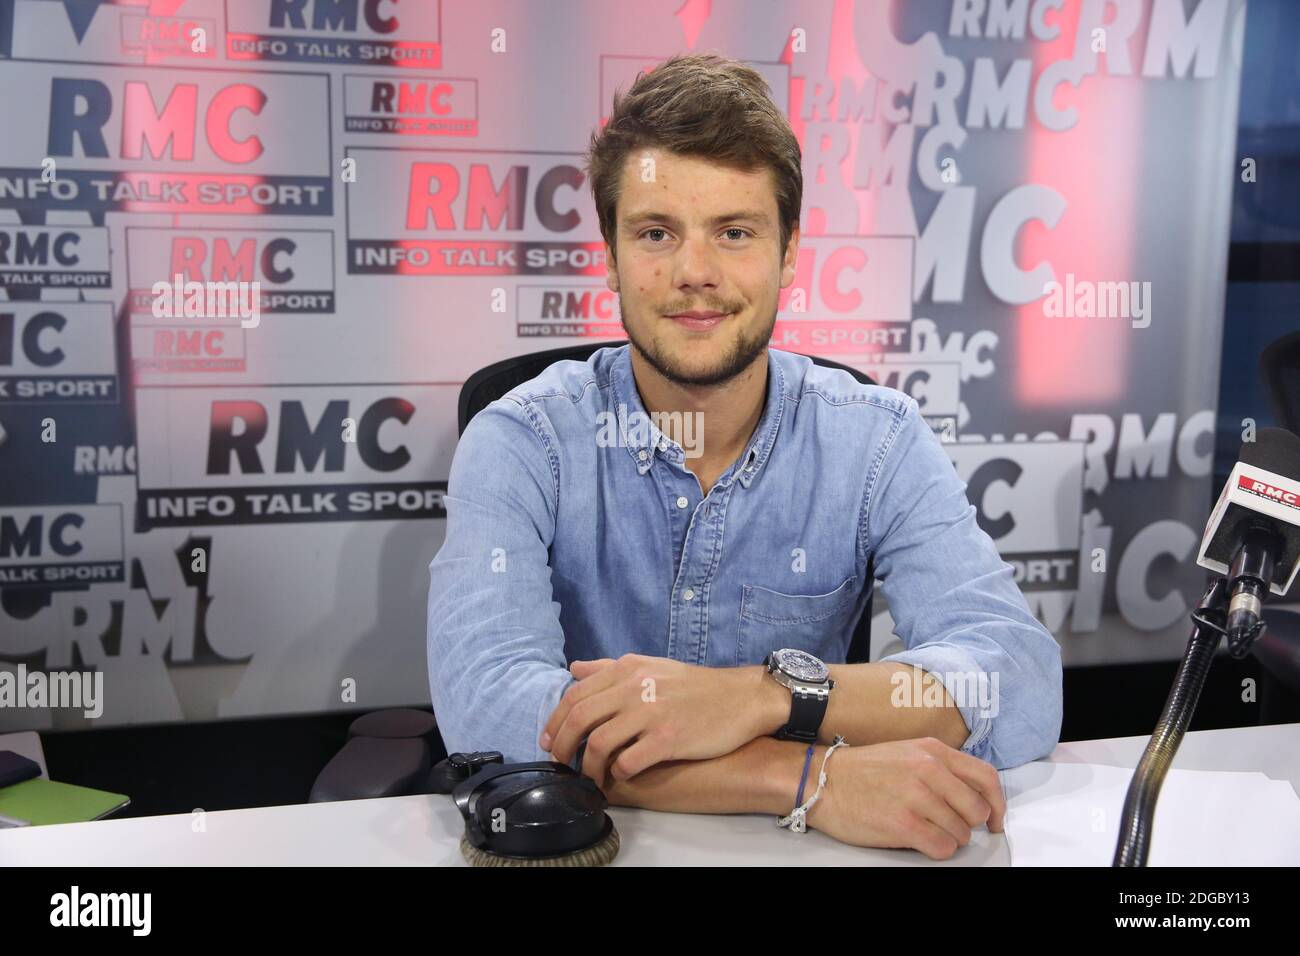 Exclusive - Adrien Tambay at the 'Moscato Show' sport talk show on RMC Radio  in Paris, France, on March 24, 2017. Photo by Jerome Domine/ABACAPRESS.COM  Stock Photo - Alamy